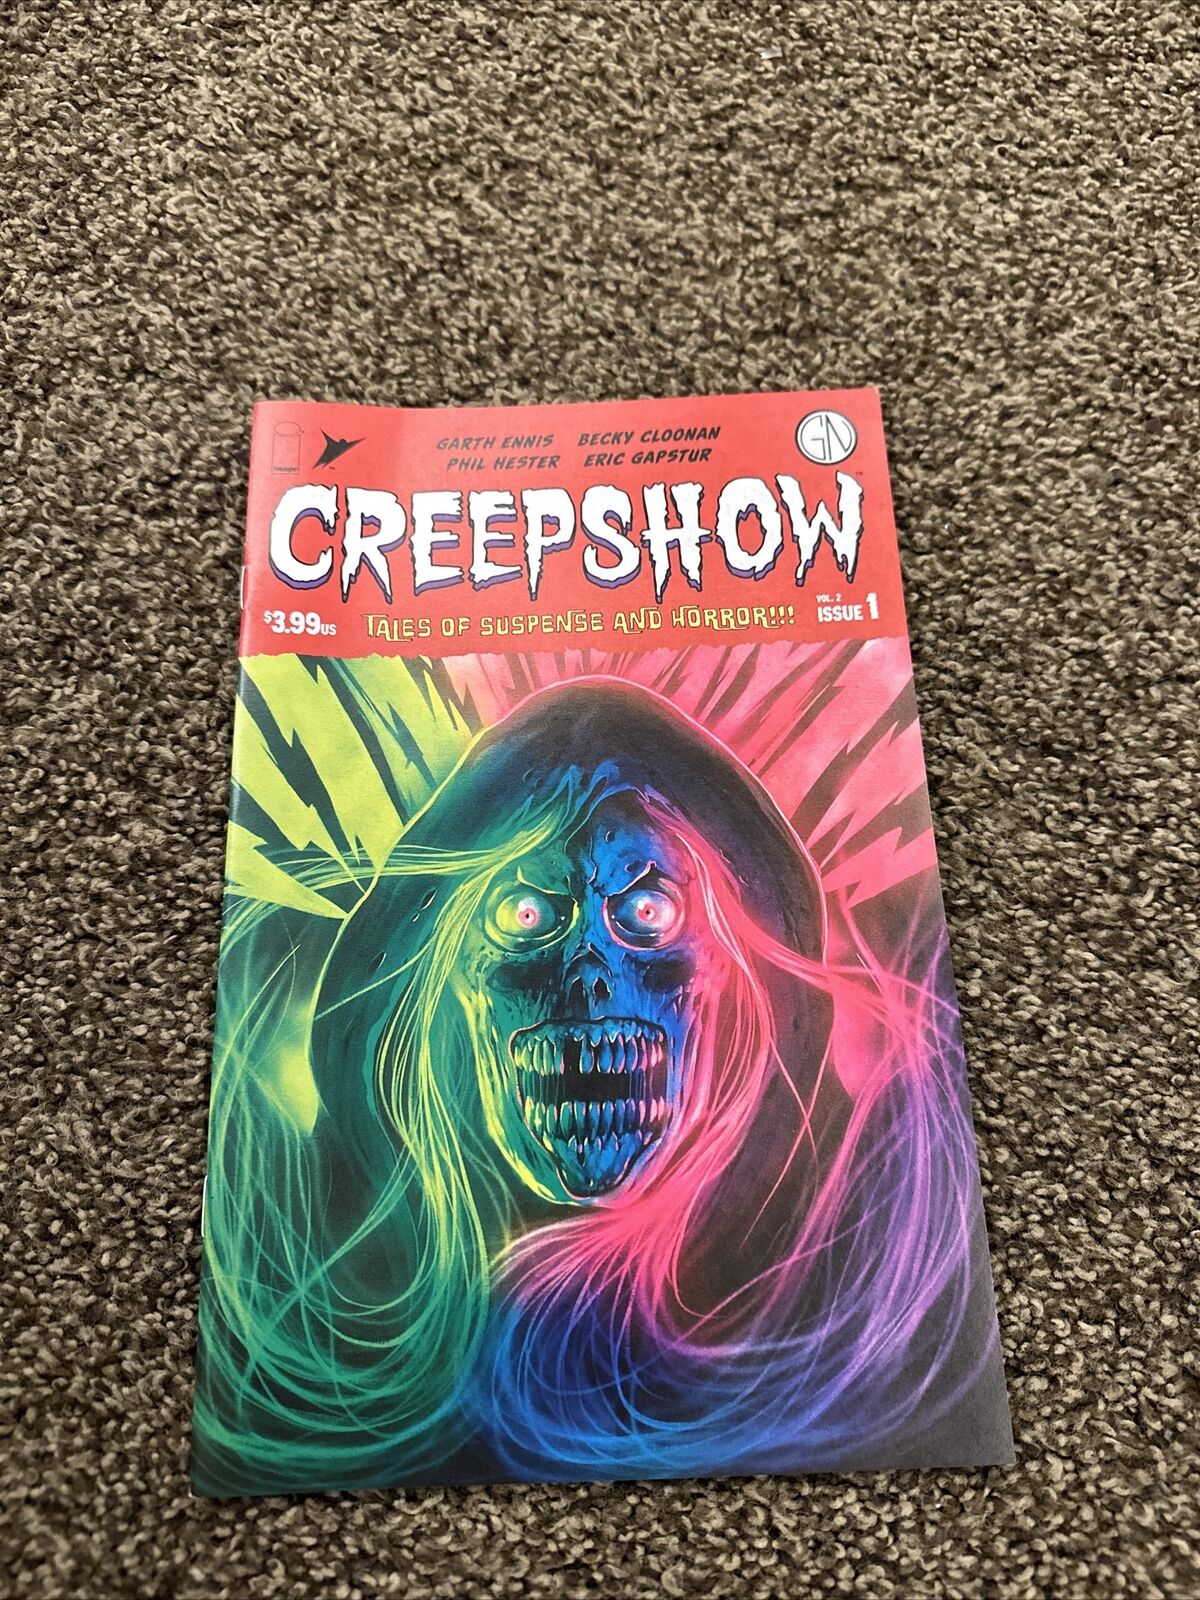 Creepshow Vol. 2 #1 Chad Keith Exclusive Variant limited